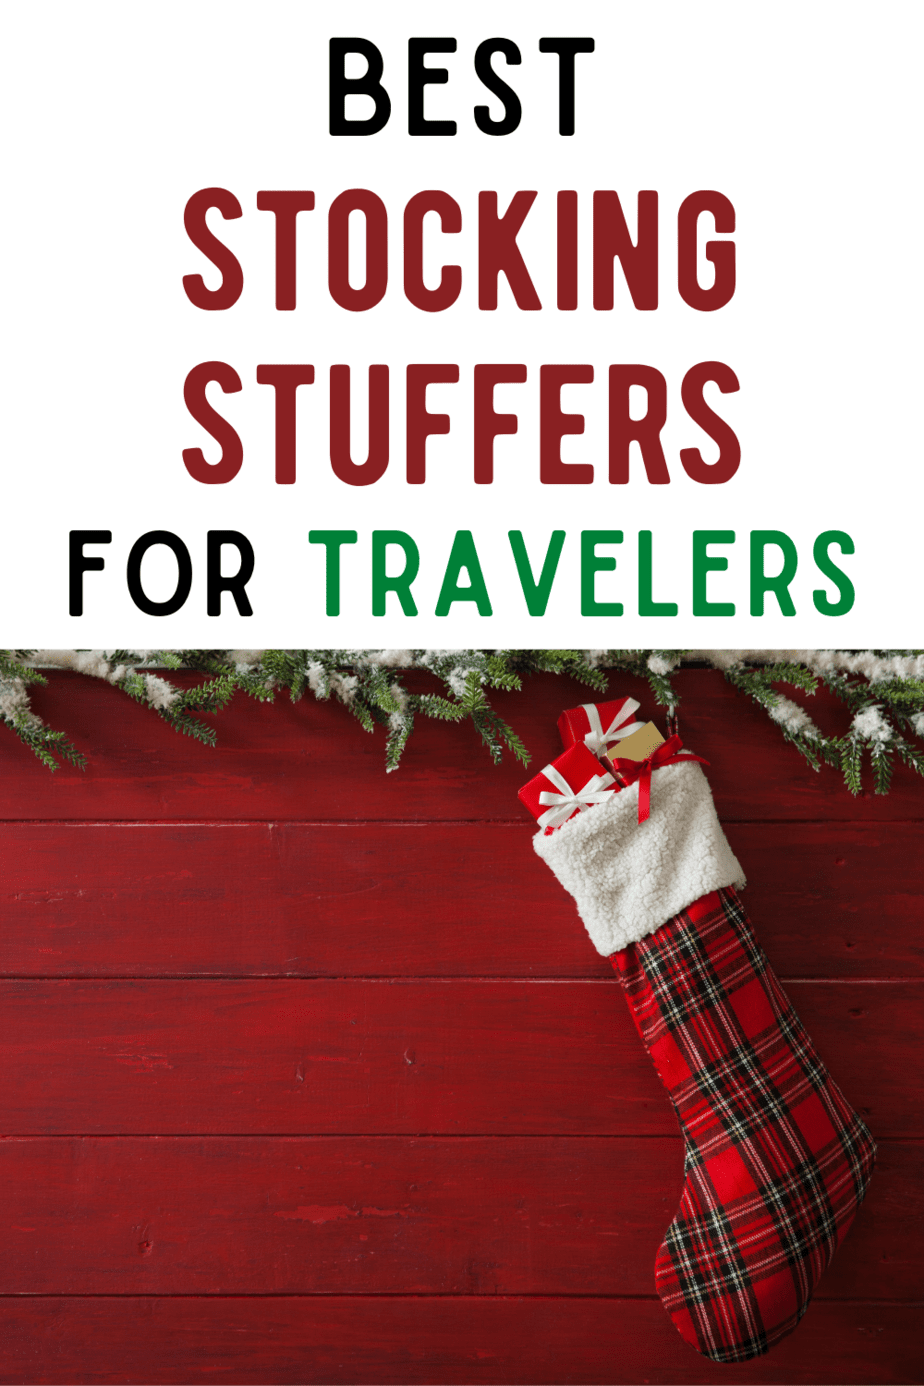 https://www.endlessdistances.com/wp-content/uploads/2019/11/best-stocking-stuffers-for-travelers-2022-1.png